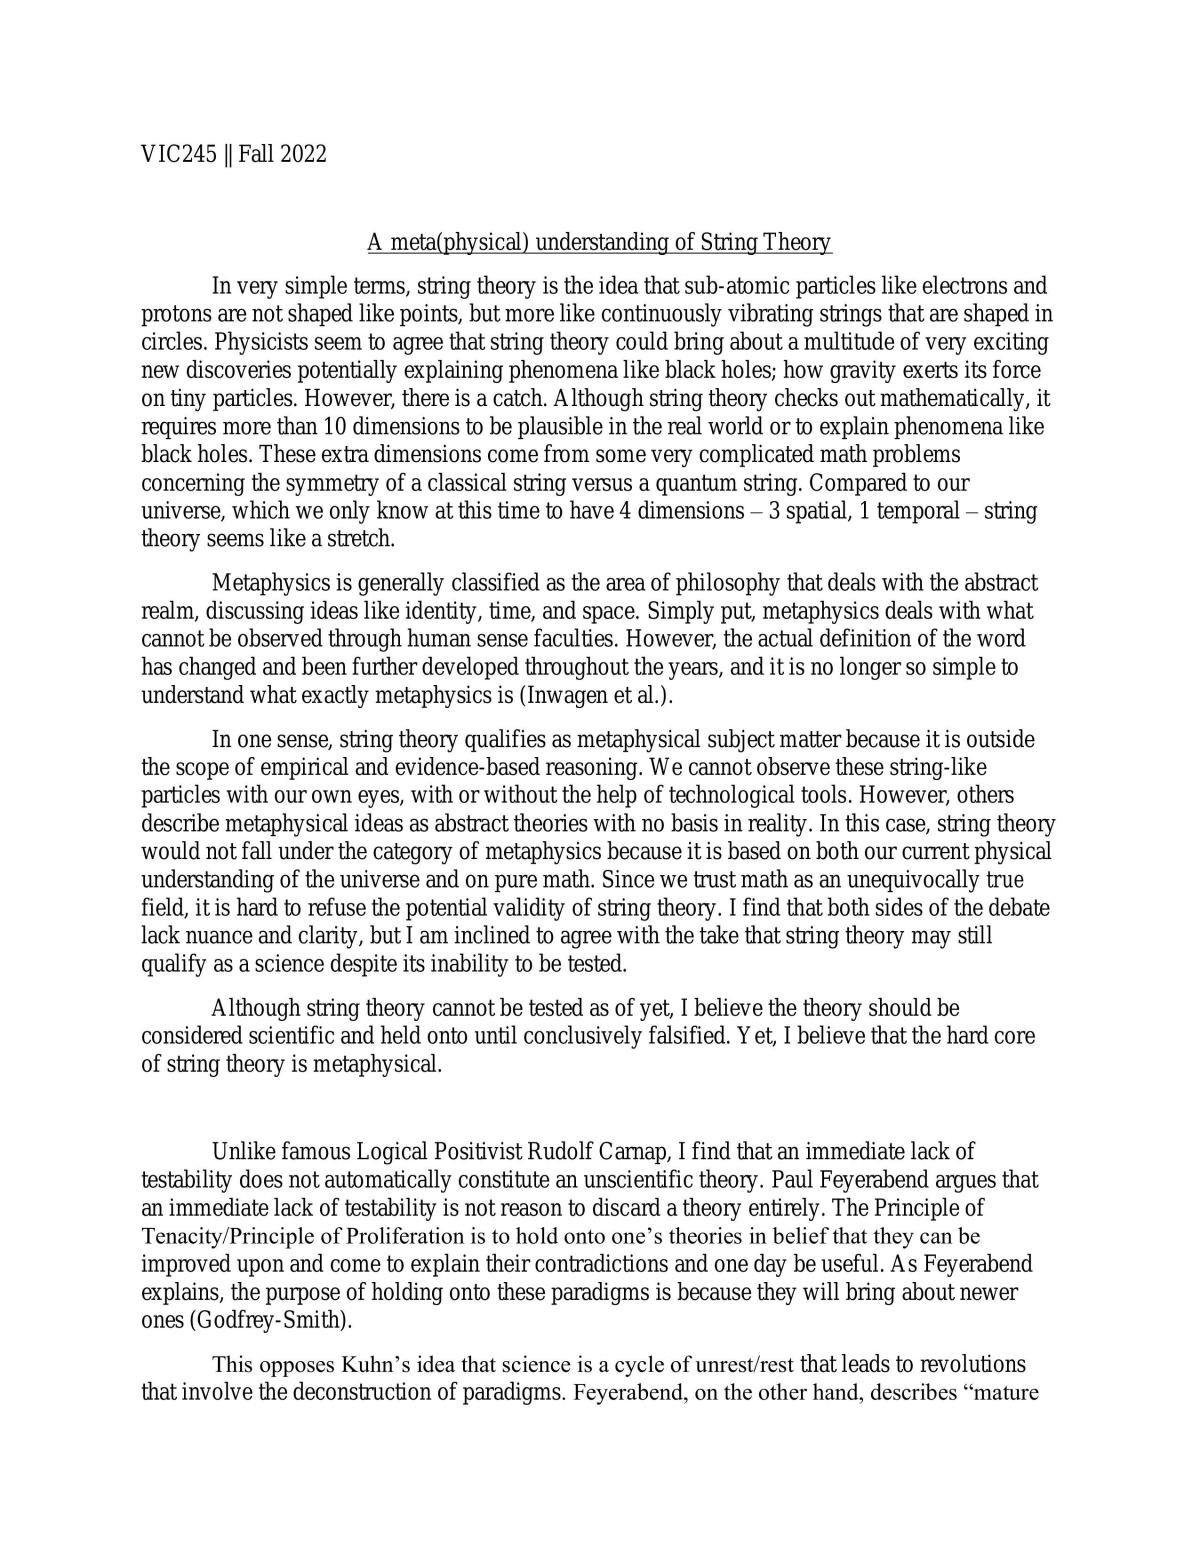 Final Essay: VIC245 - Page 1